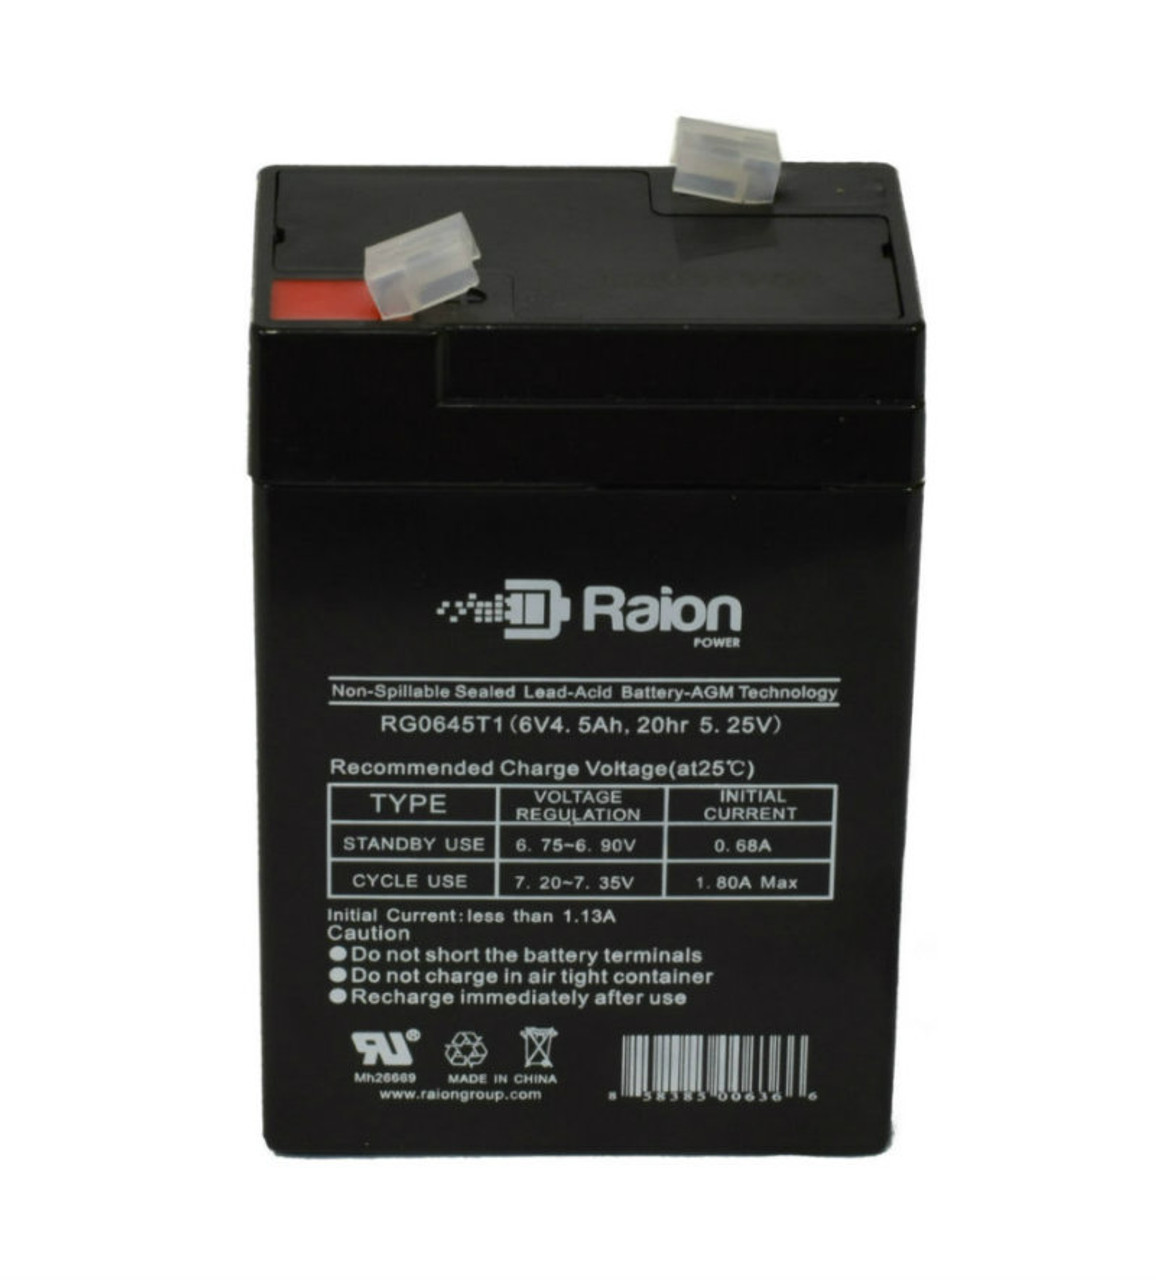 Raion Power RG0645T1 Replacement Battery Cartridge for Mcgaw 521 Plus